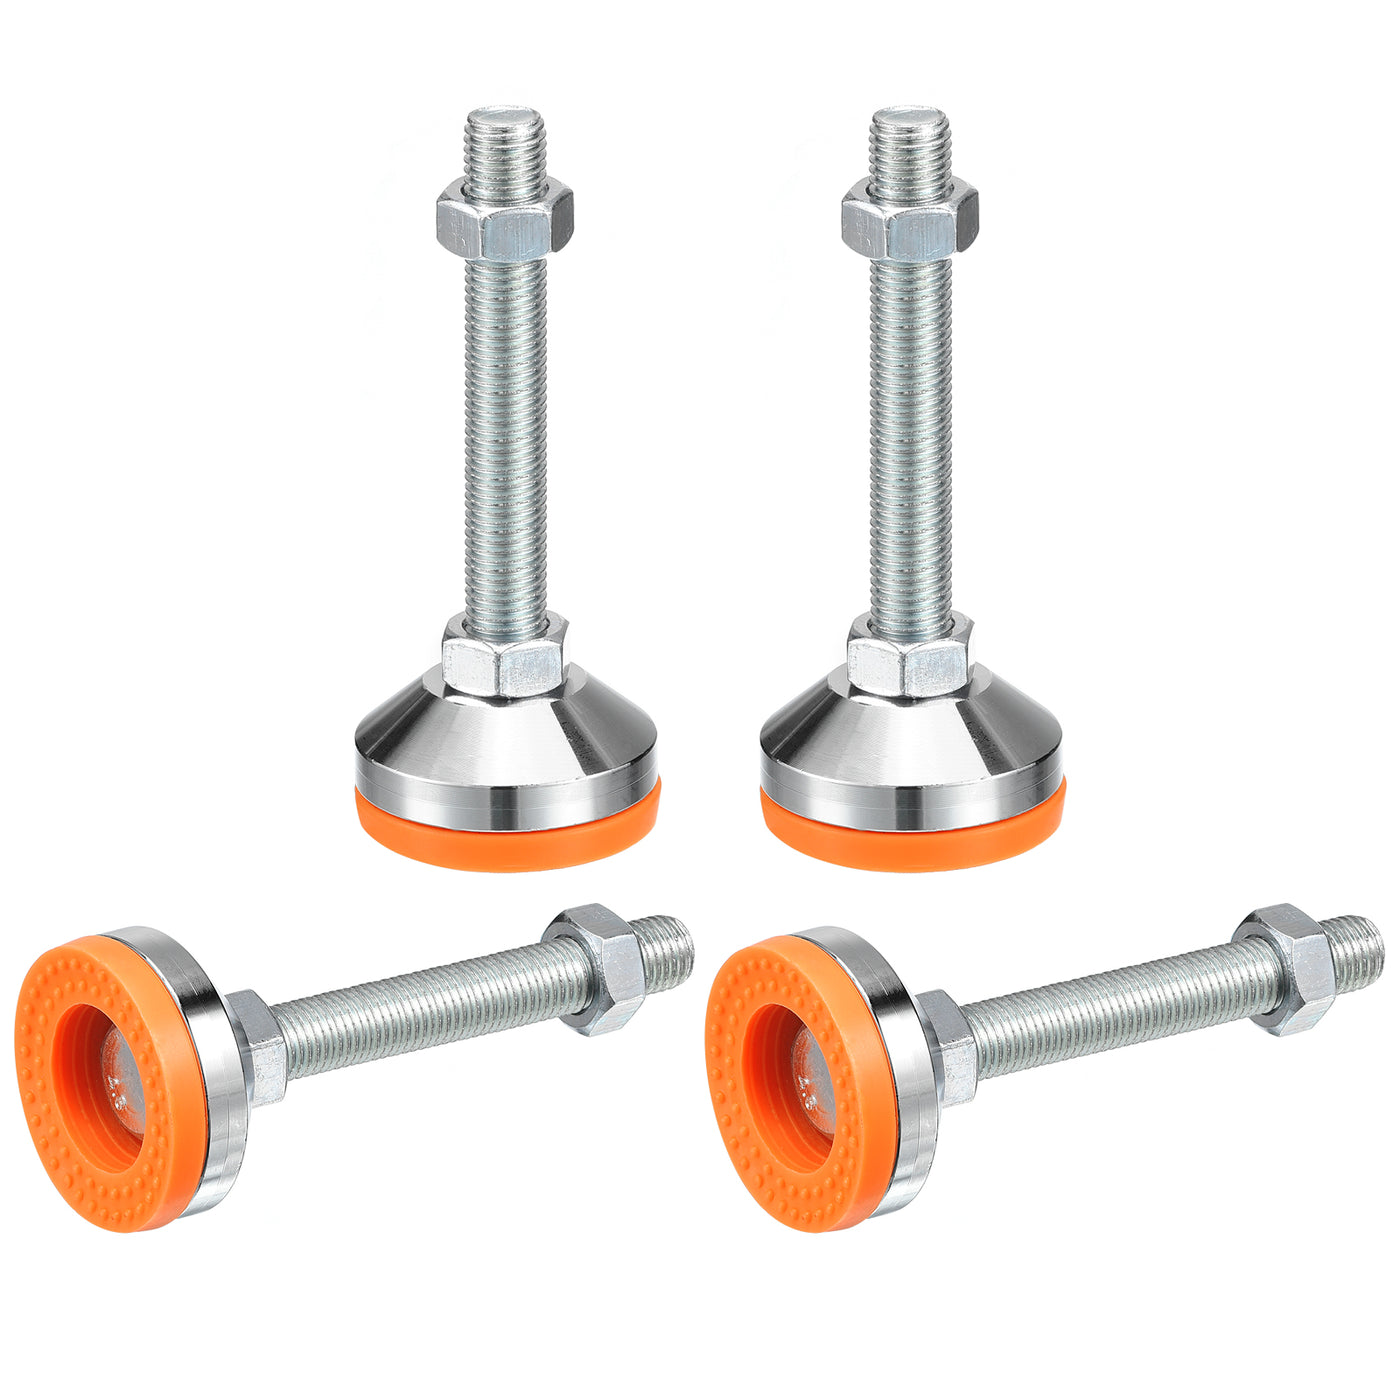 uxcell Uxcell Leveling Feet, 4Pcs M16x120x60mm - Carbon Steel Non-Skid Anti-shock Adjustable Table Feet, Leveling Screw Leg for Furniture Workshops Equipment